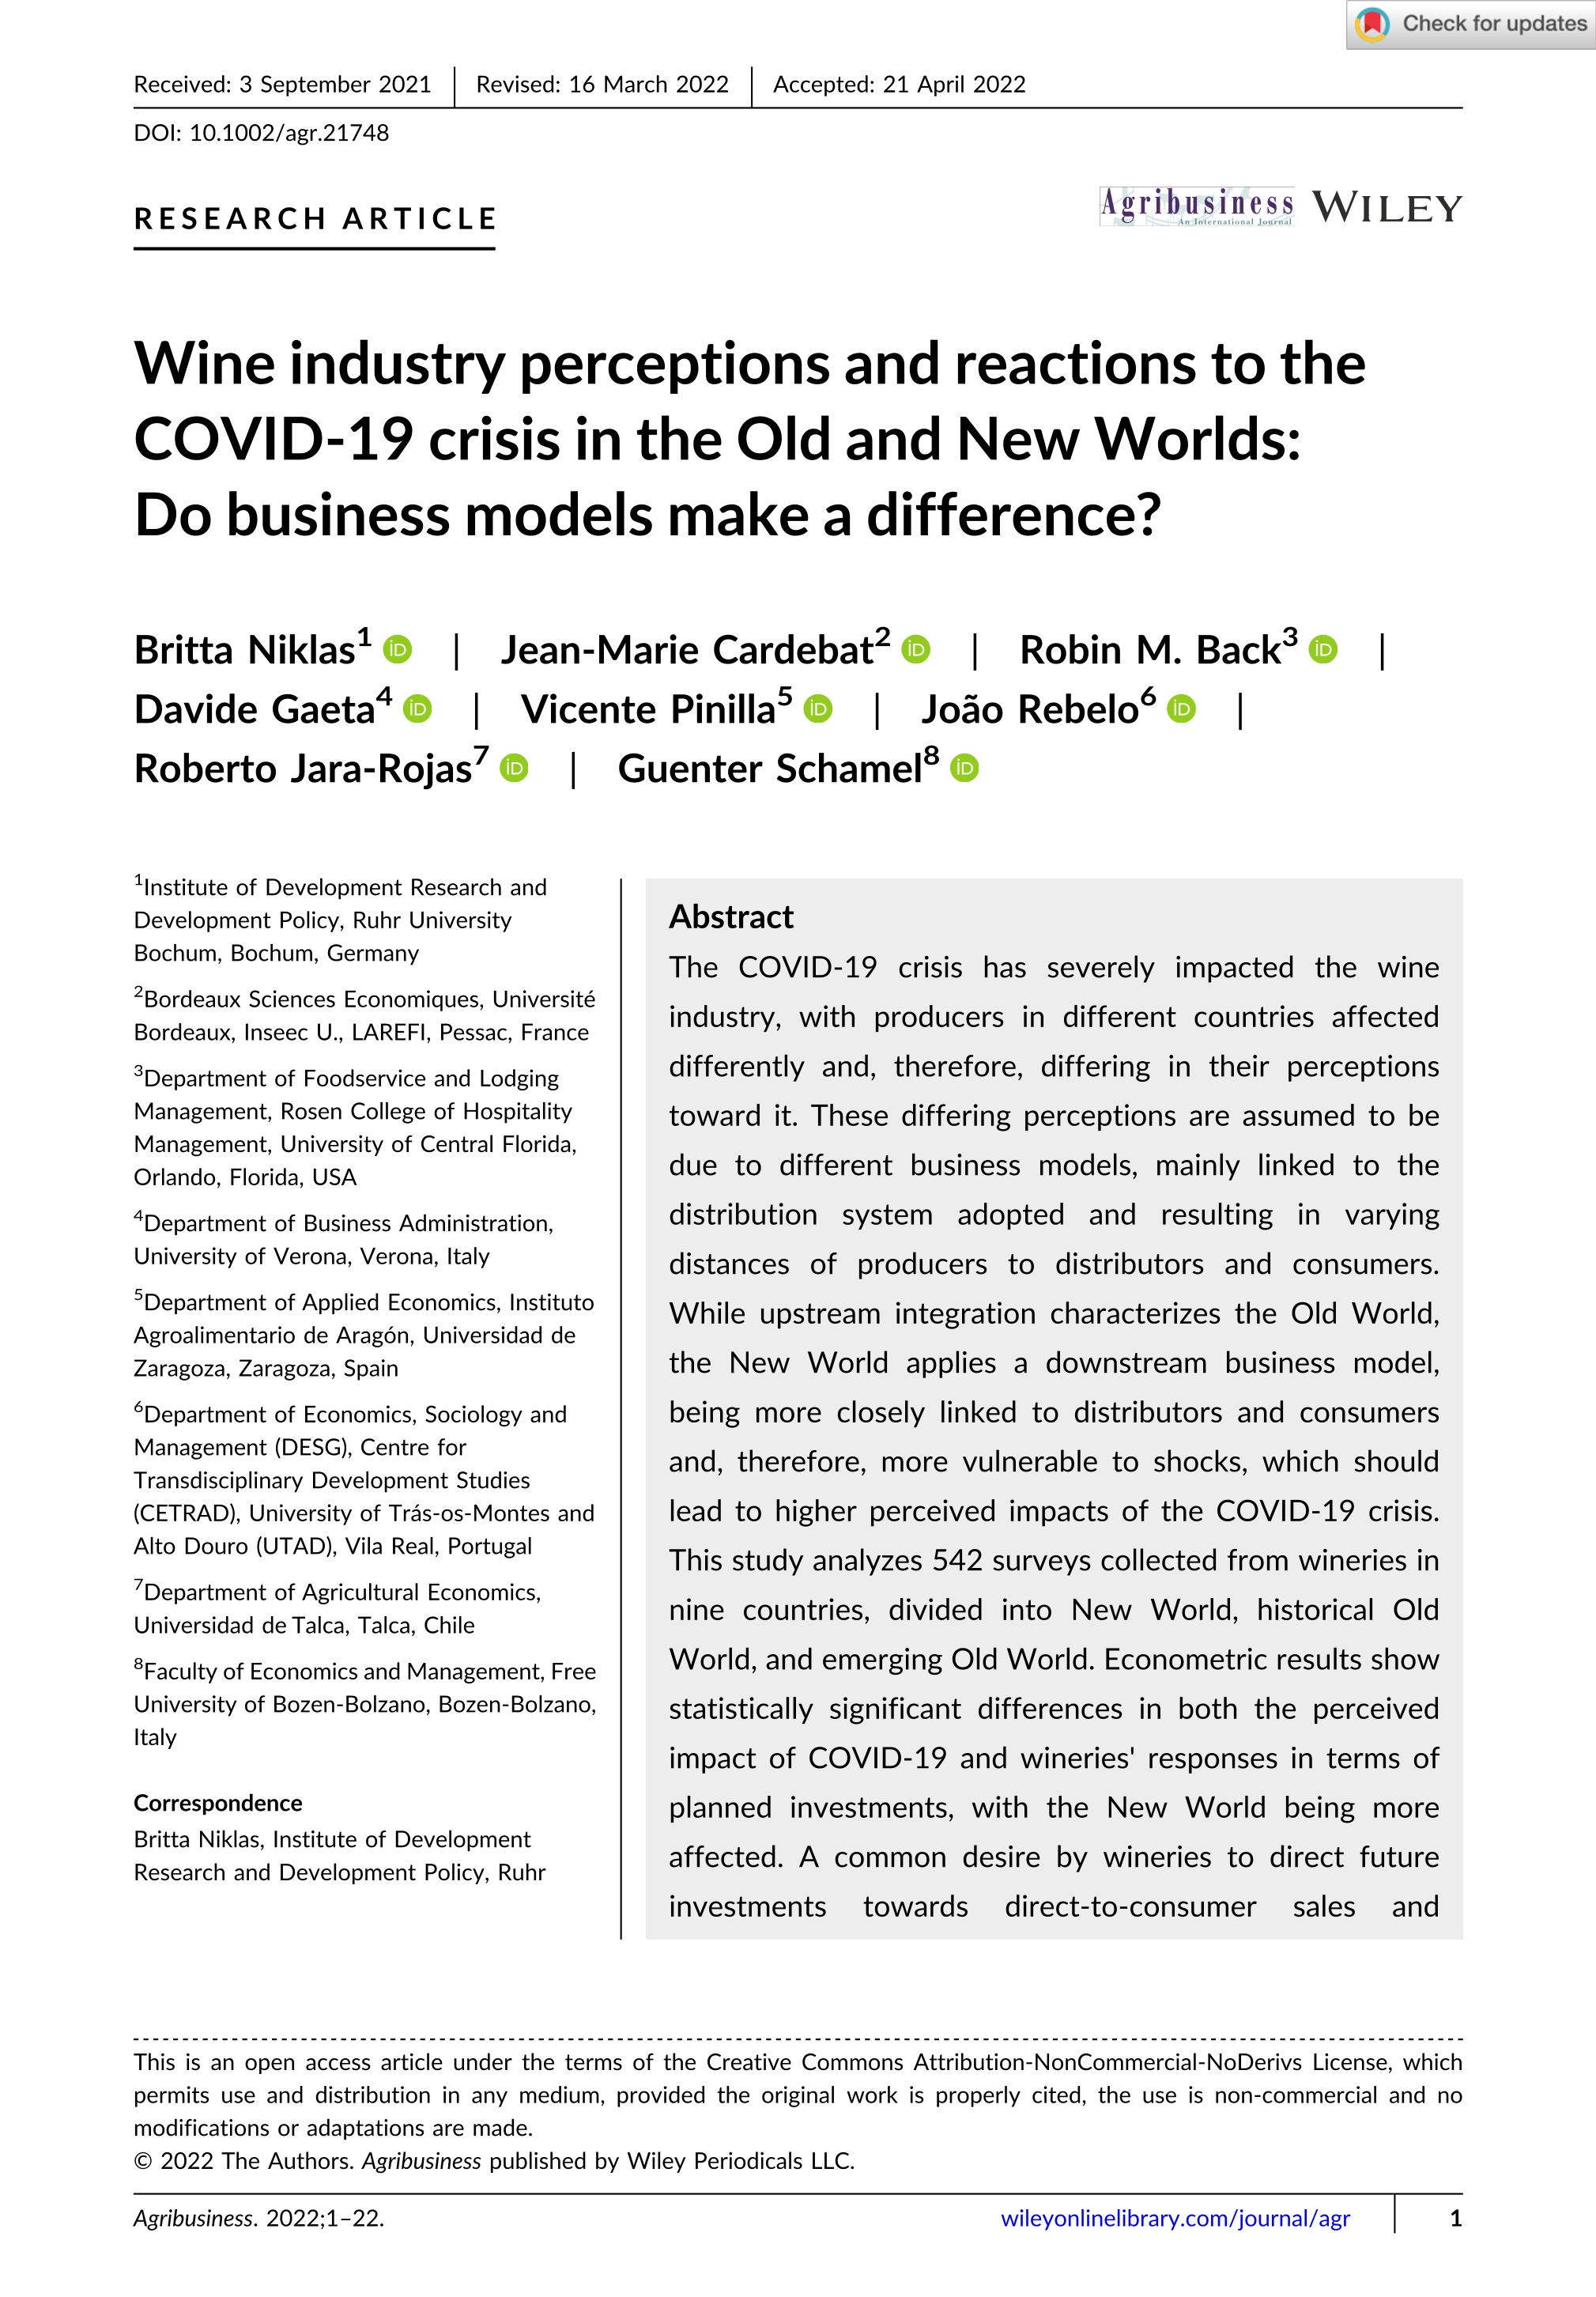 Wine industry perceptions and reactions to the COVID-19 crisis in the Old and New Worlds: Do business models make a difference?